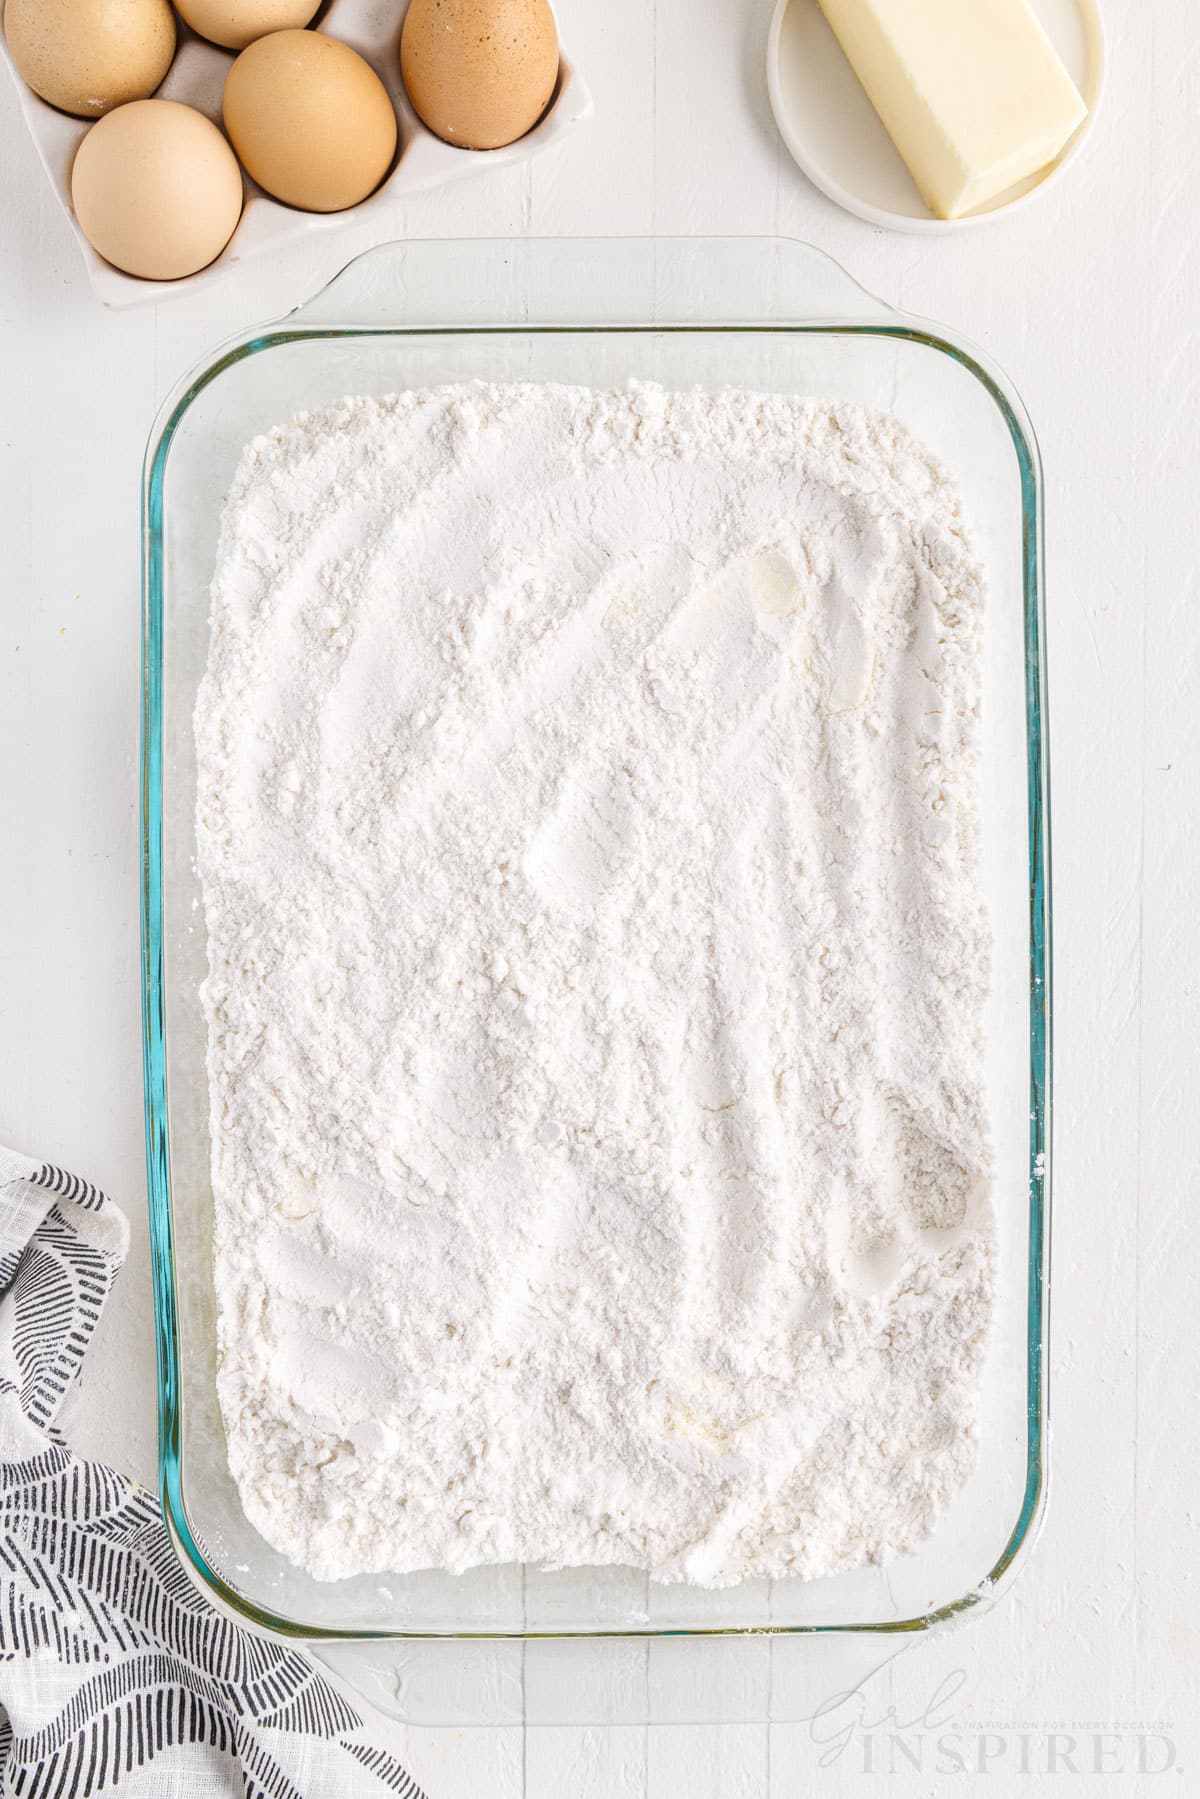 Baking dish with white cake mix on top of the cream cheese mixture, tray of eggs, stick of butter, textile linen, on a marble countertop.